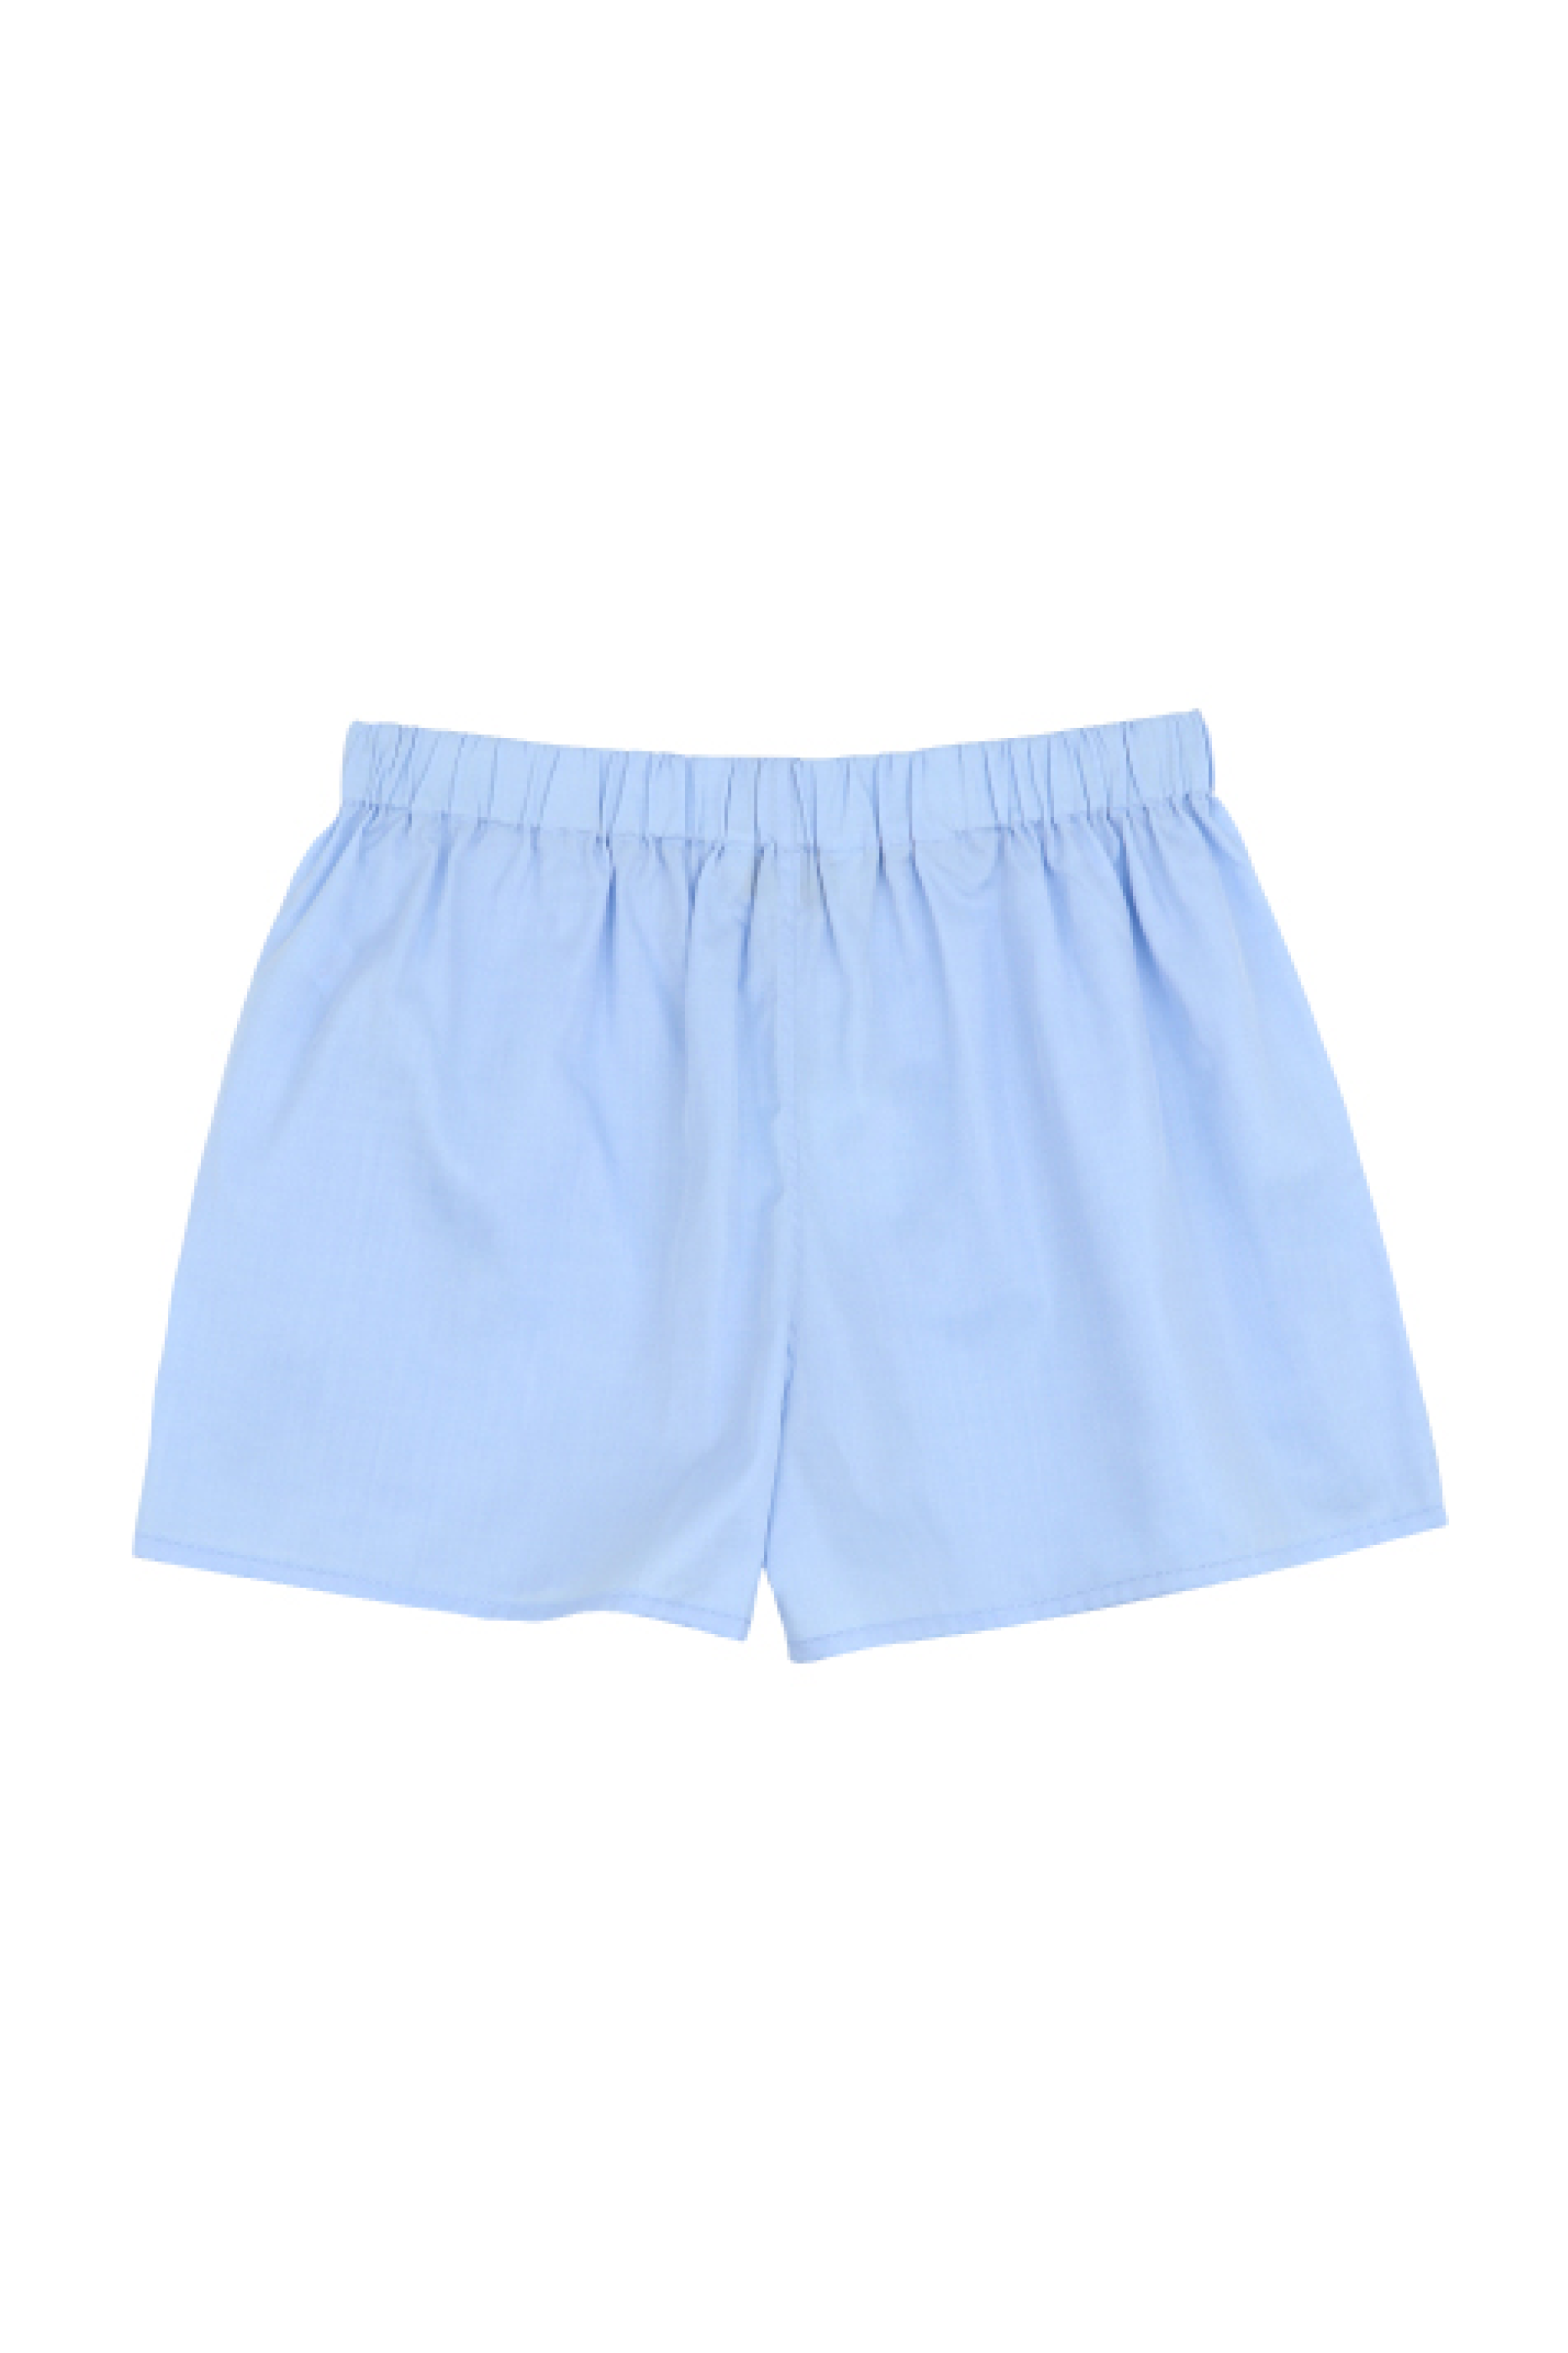 The Marcel in sky blue cotton broadcloth